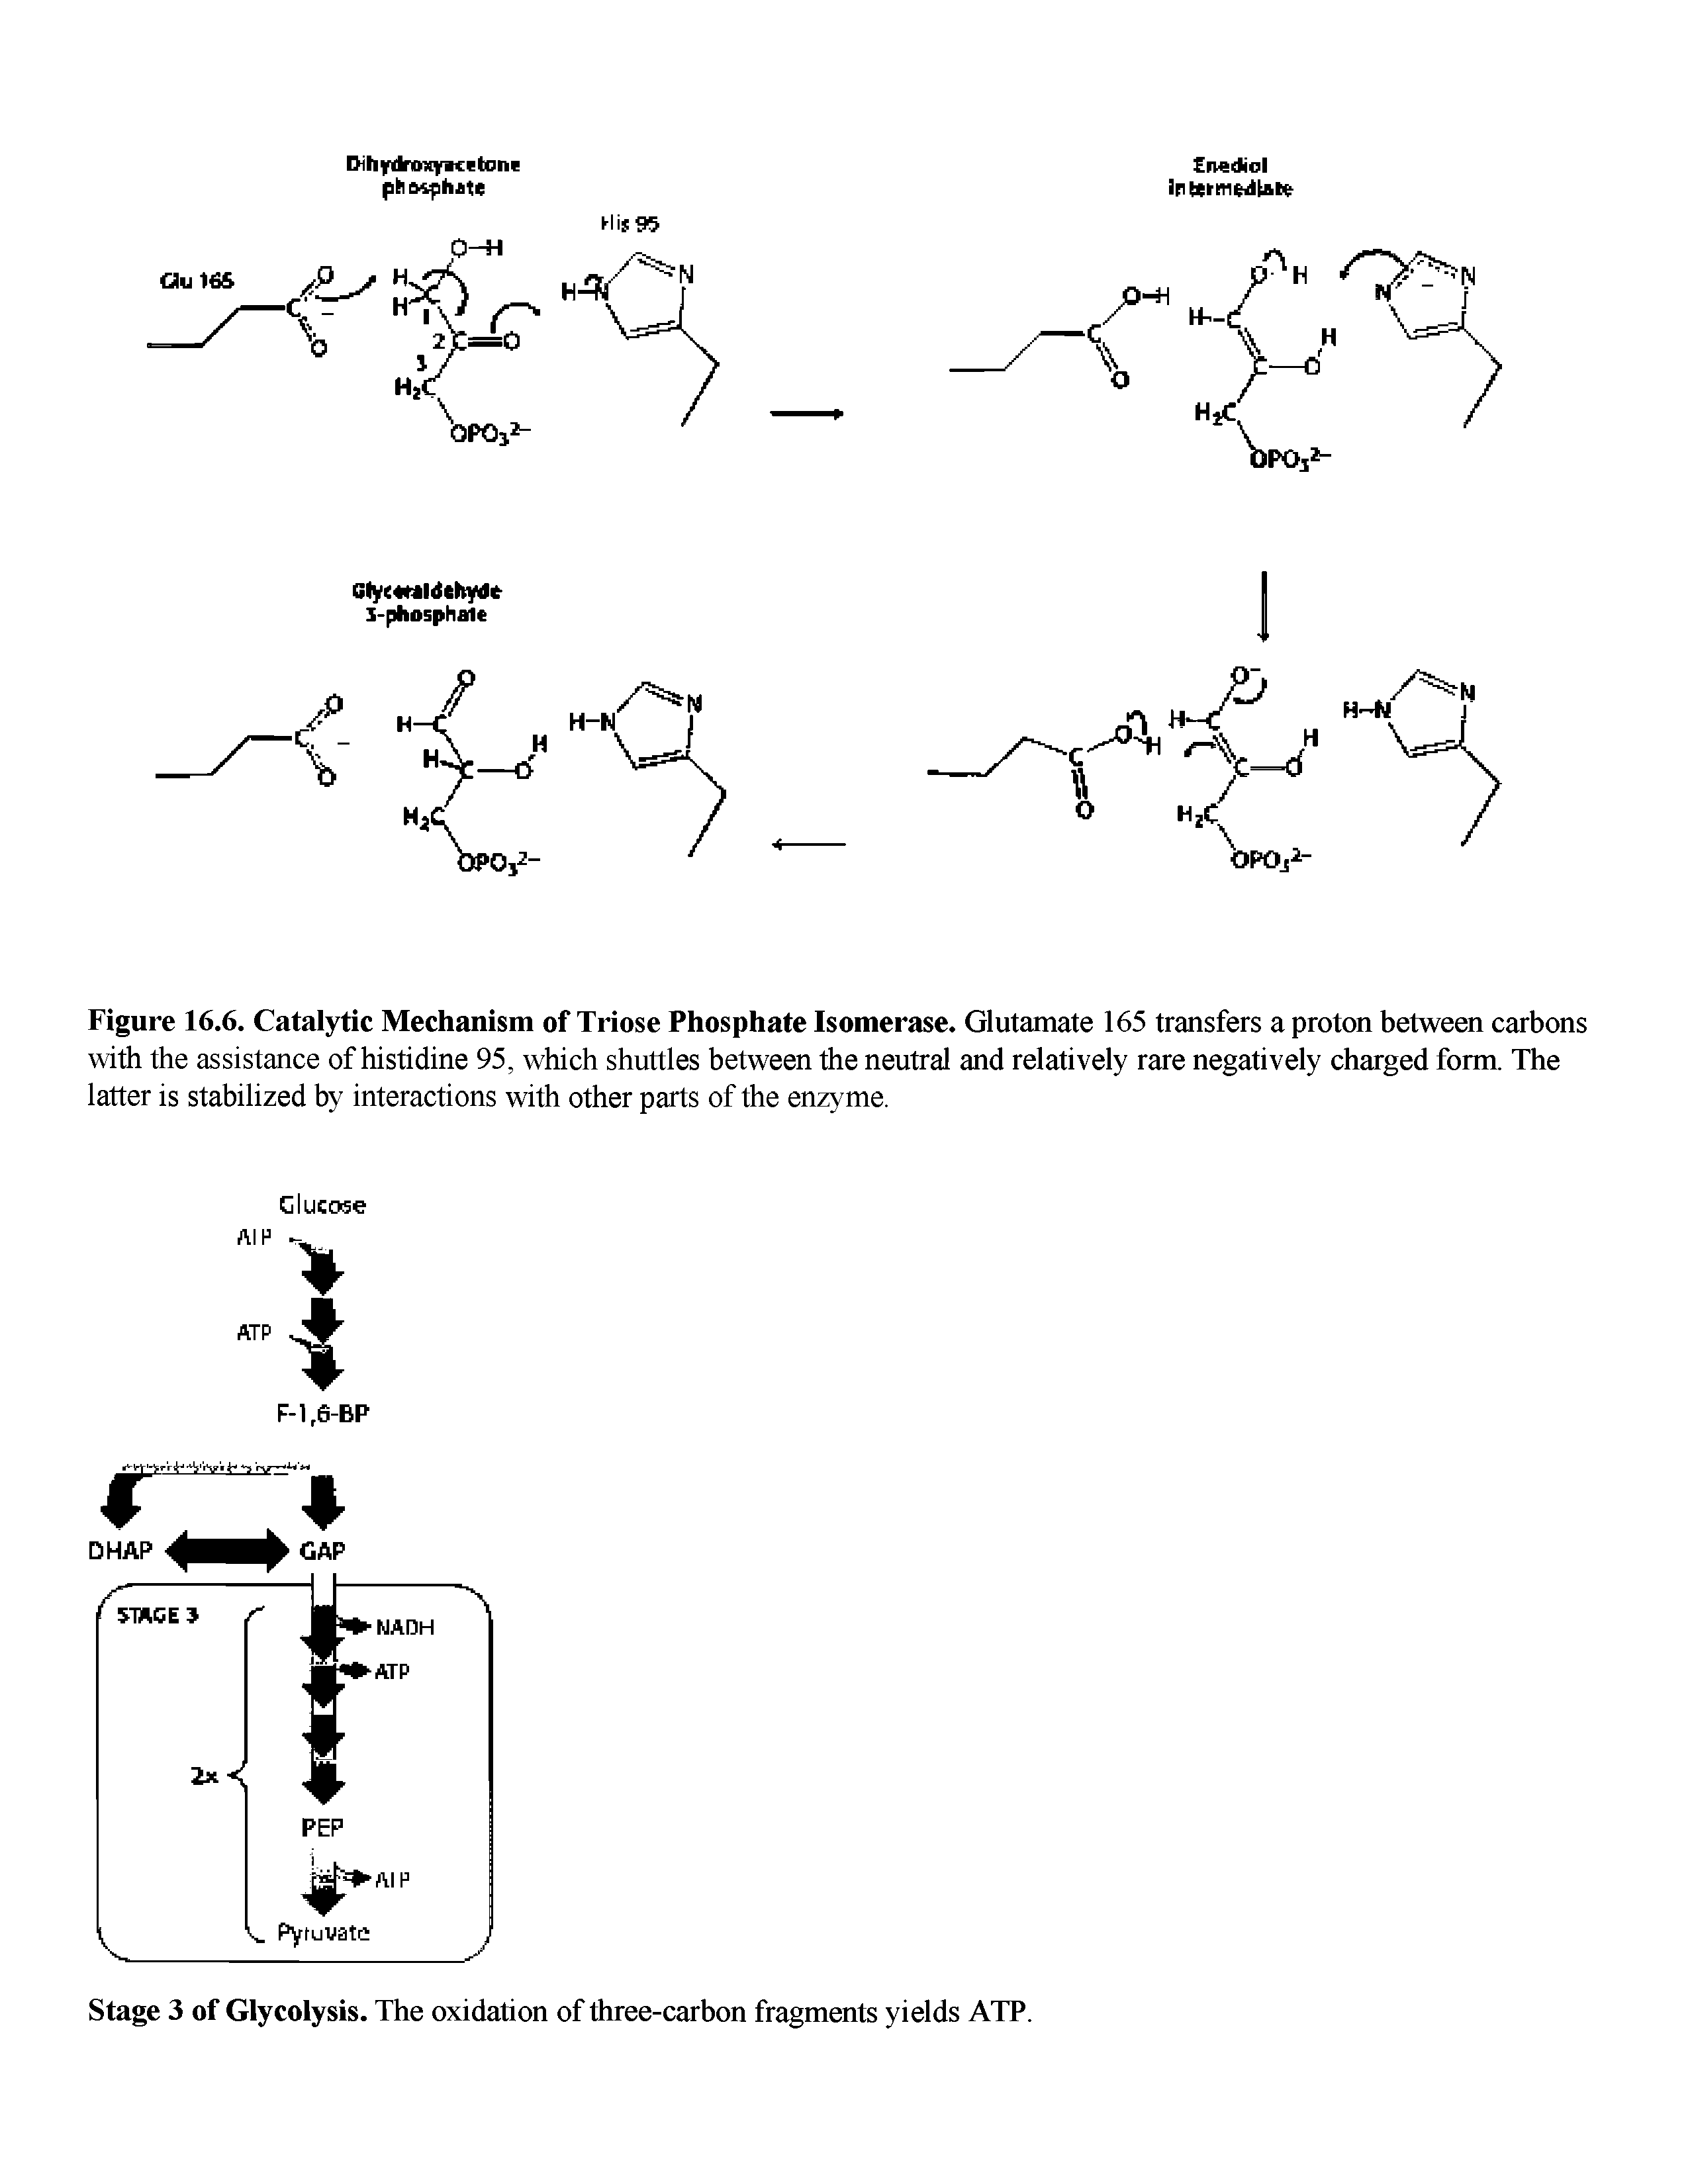 Figure 16.6. Catalytic Mechanism of Triose Phosphate Isomerase. Glutamate 165 transfers a proton between carbons with the assistance of histidine 95, which shuttles between the neutral and relatively rare negatively charged form. The latter is stabilized by interactions with other parts of the enzyme.